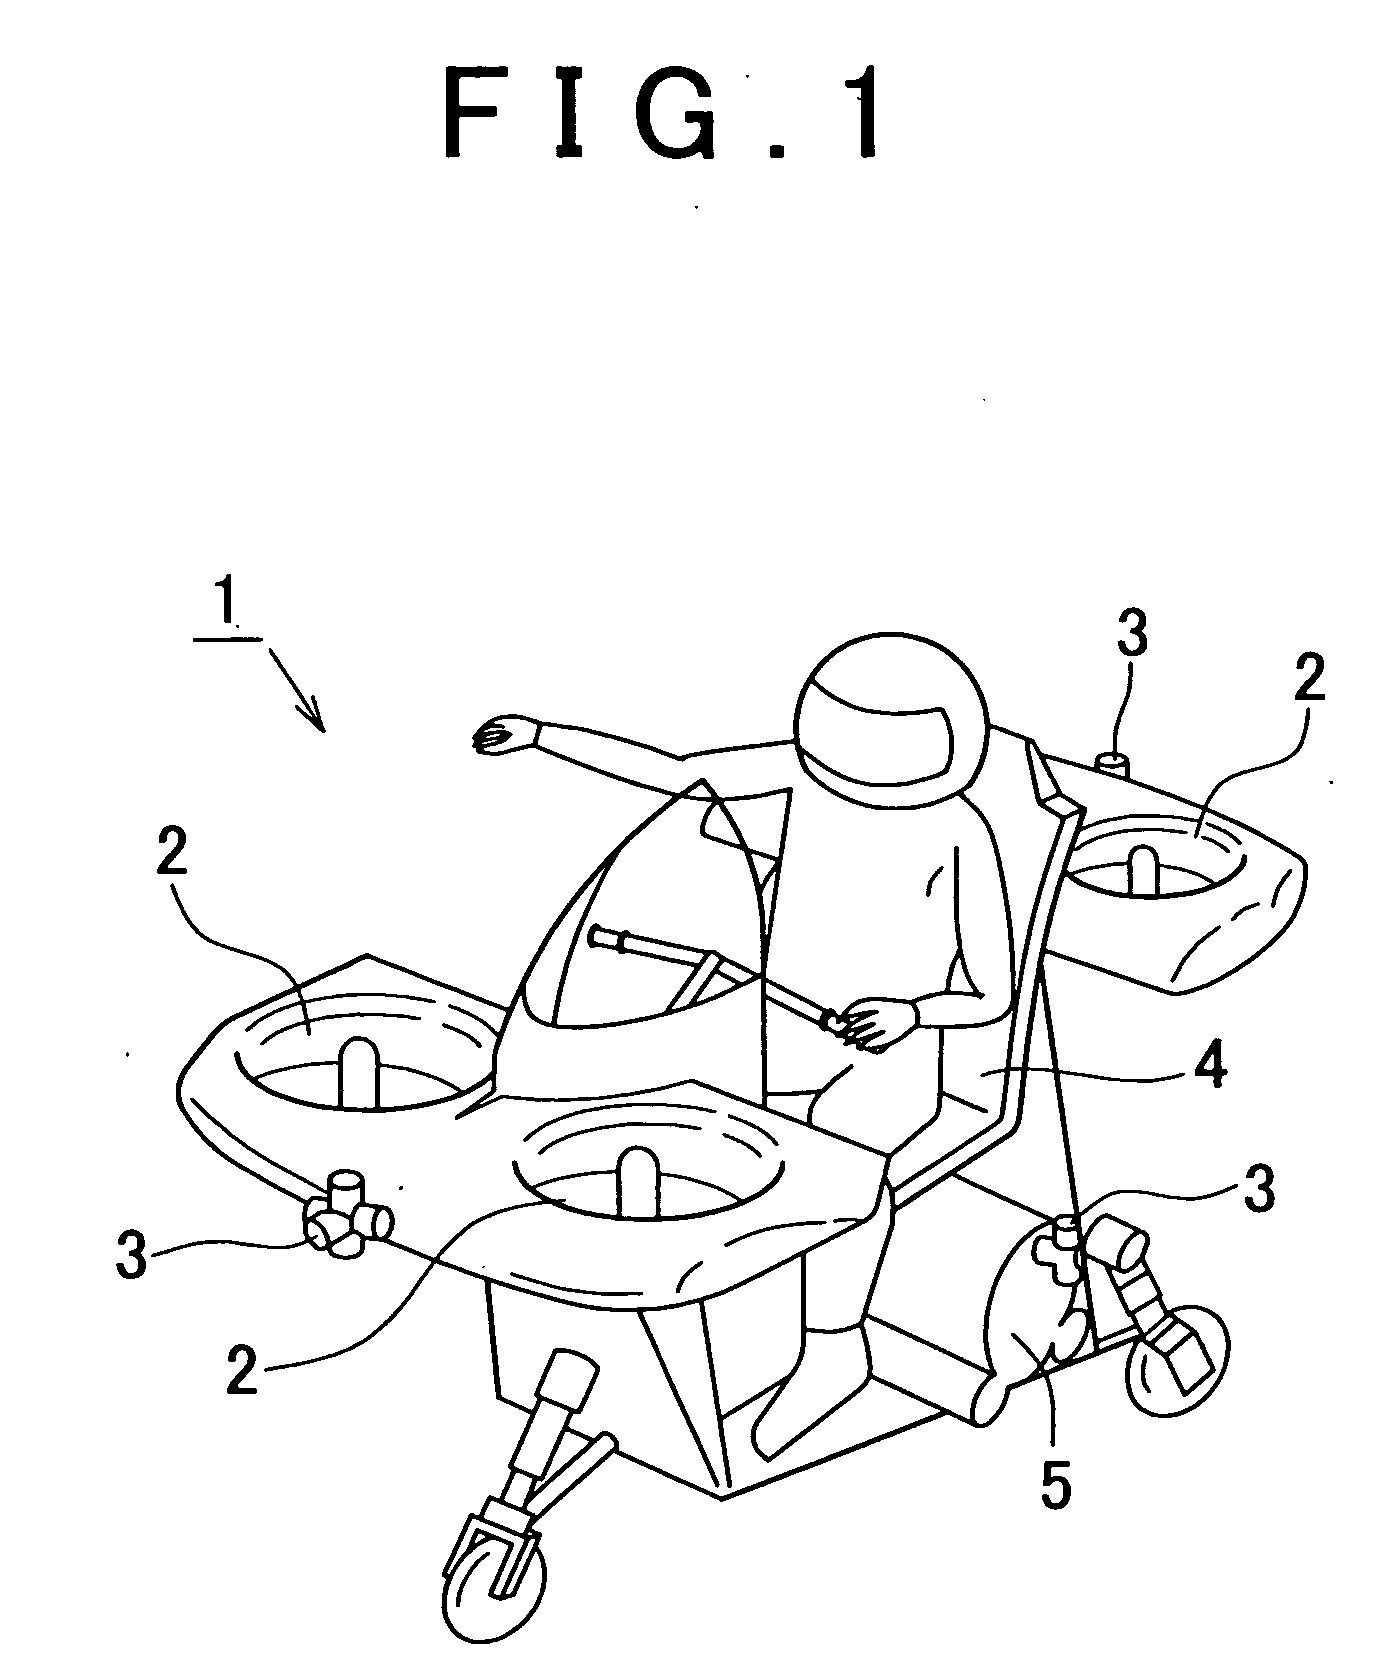 Control apparatus and control method for aircraft